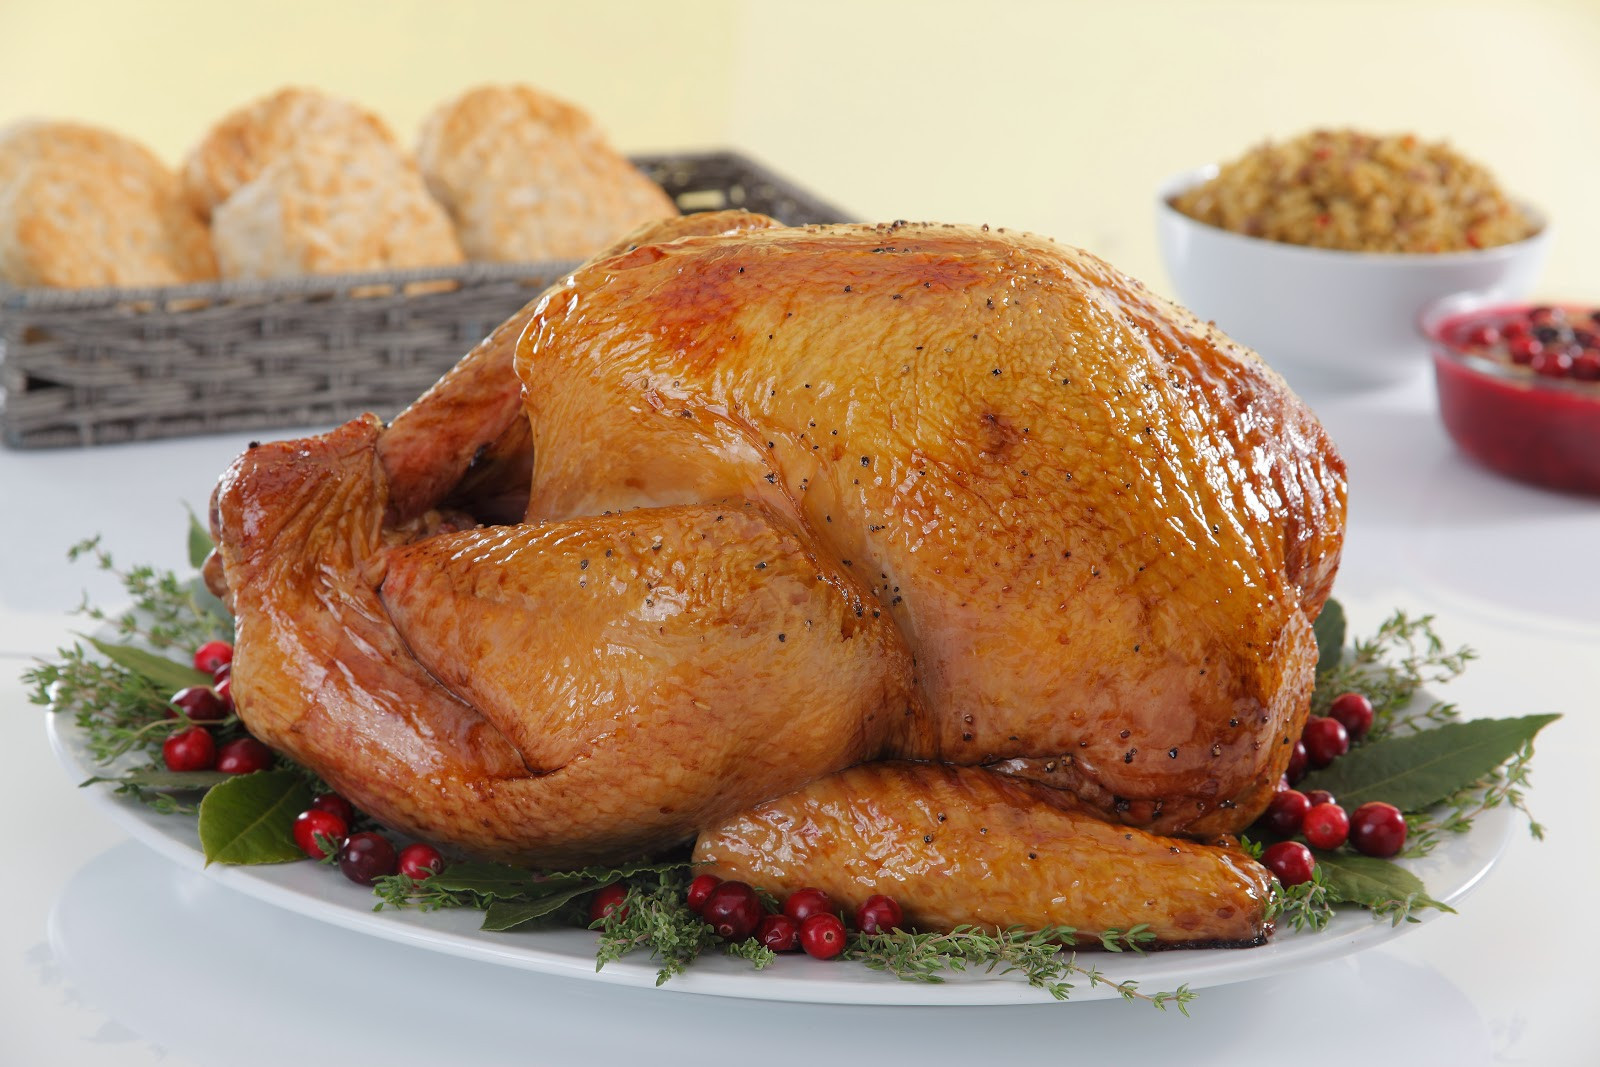 Fried Turkey For Thanksgiving
 Try out Bojangles Seasoned Deep Fried Turkey for